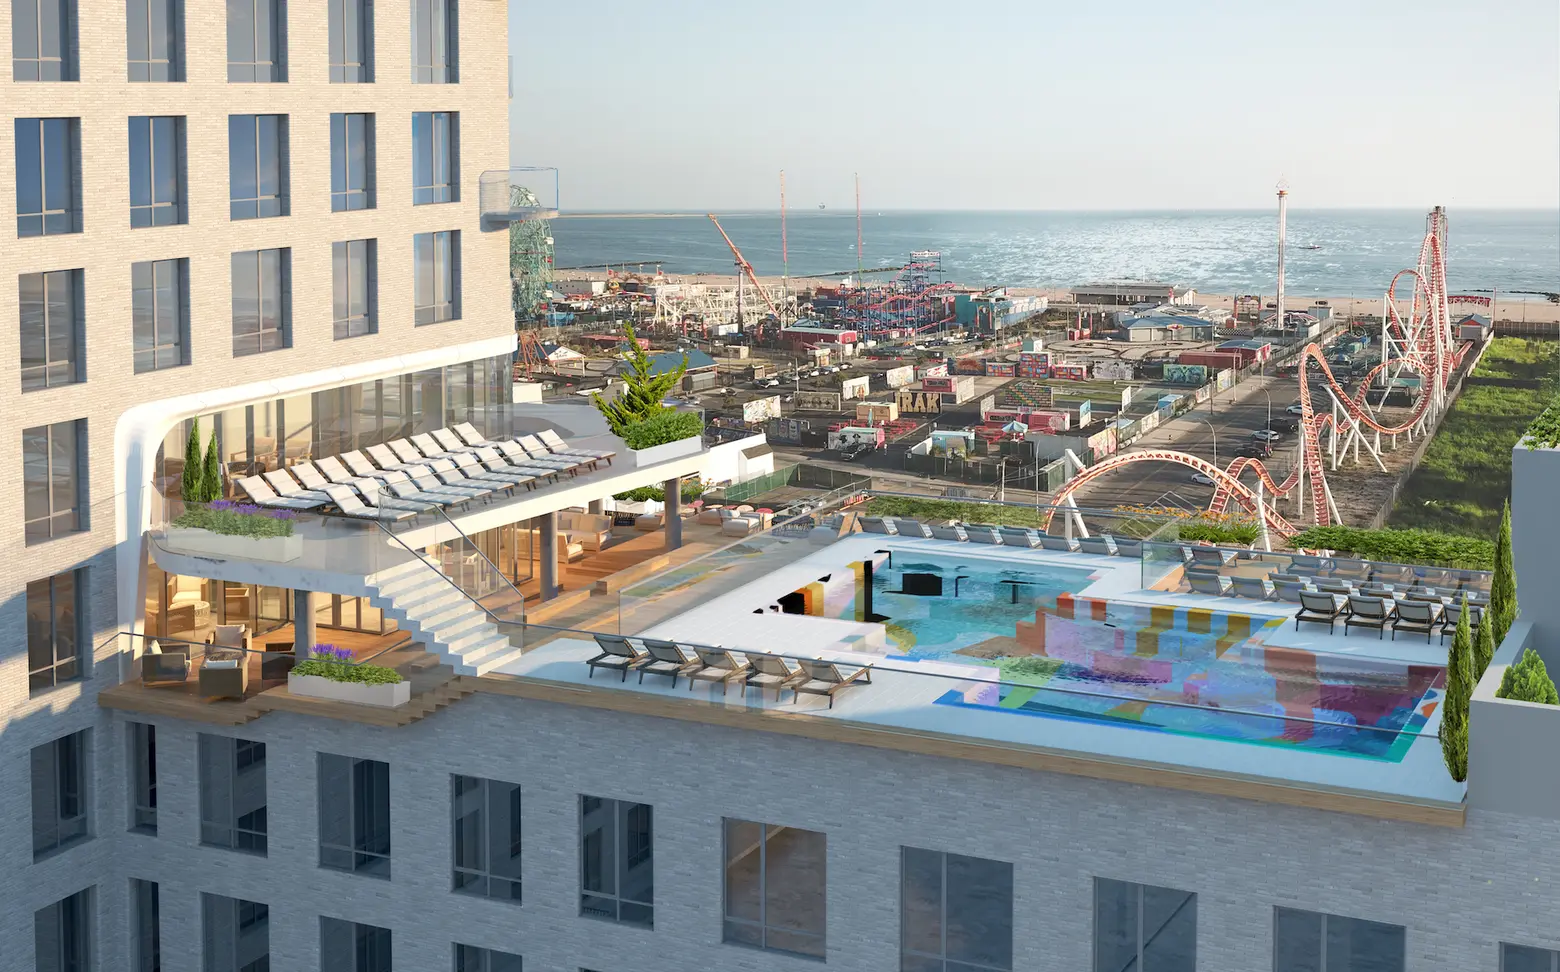 Proposed Coney Island complex has 461 units and outdoor pool with ocean views